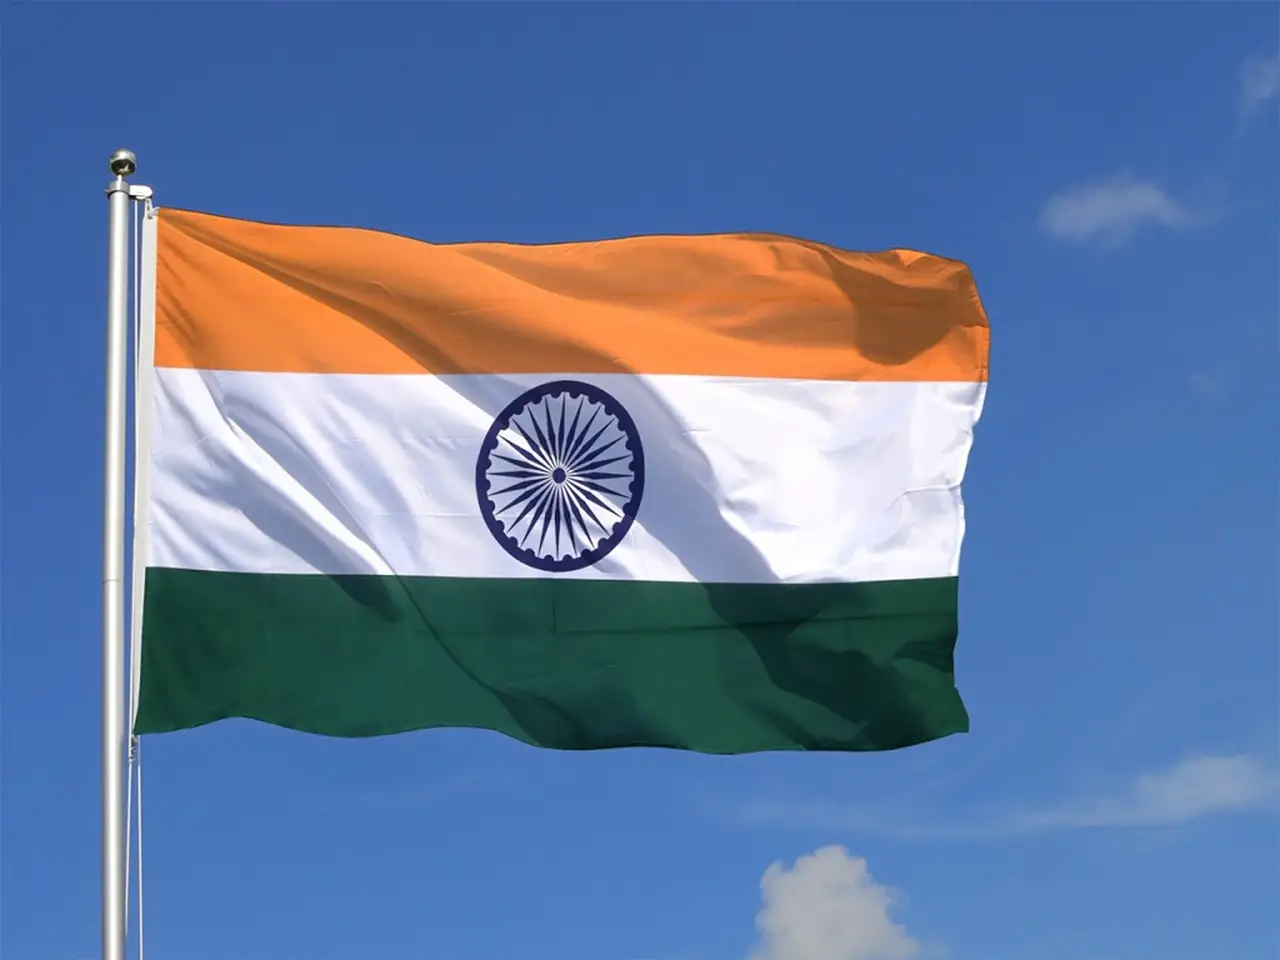 You can buy the Indian Flag online and get it delivered home by your nearest post office. There will be no GST charged.